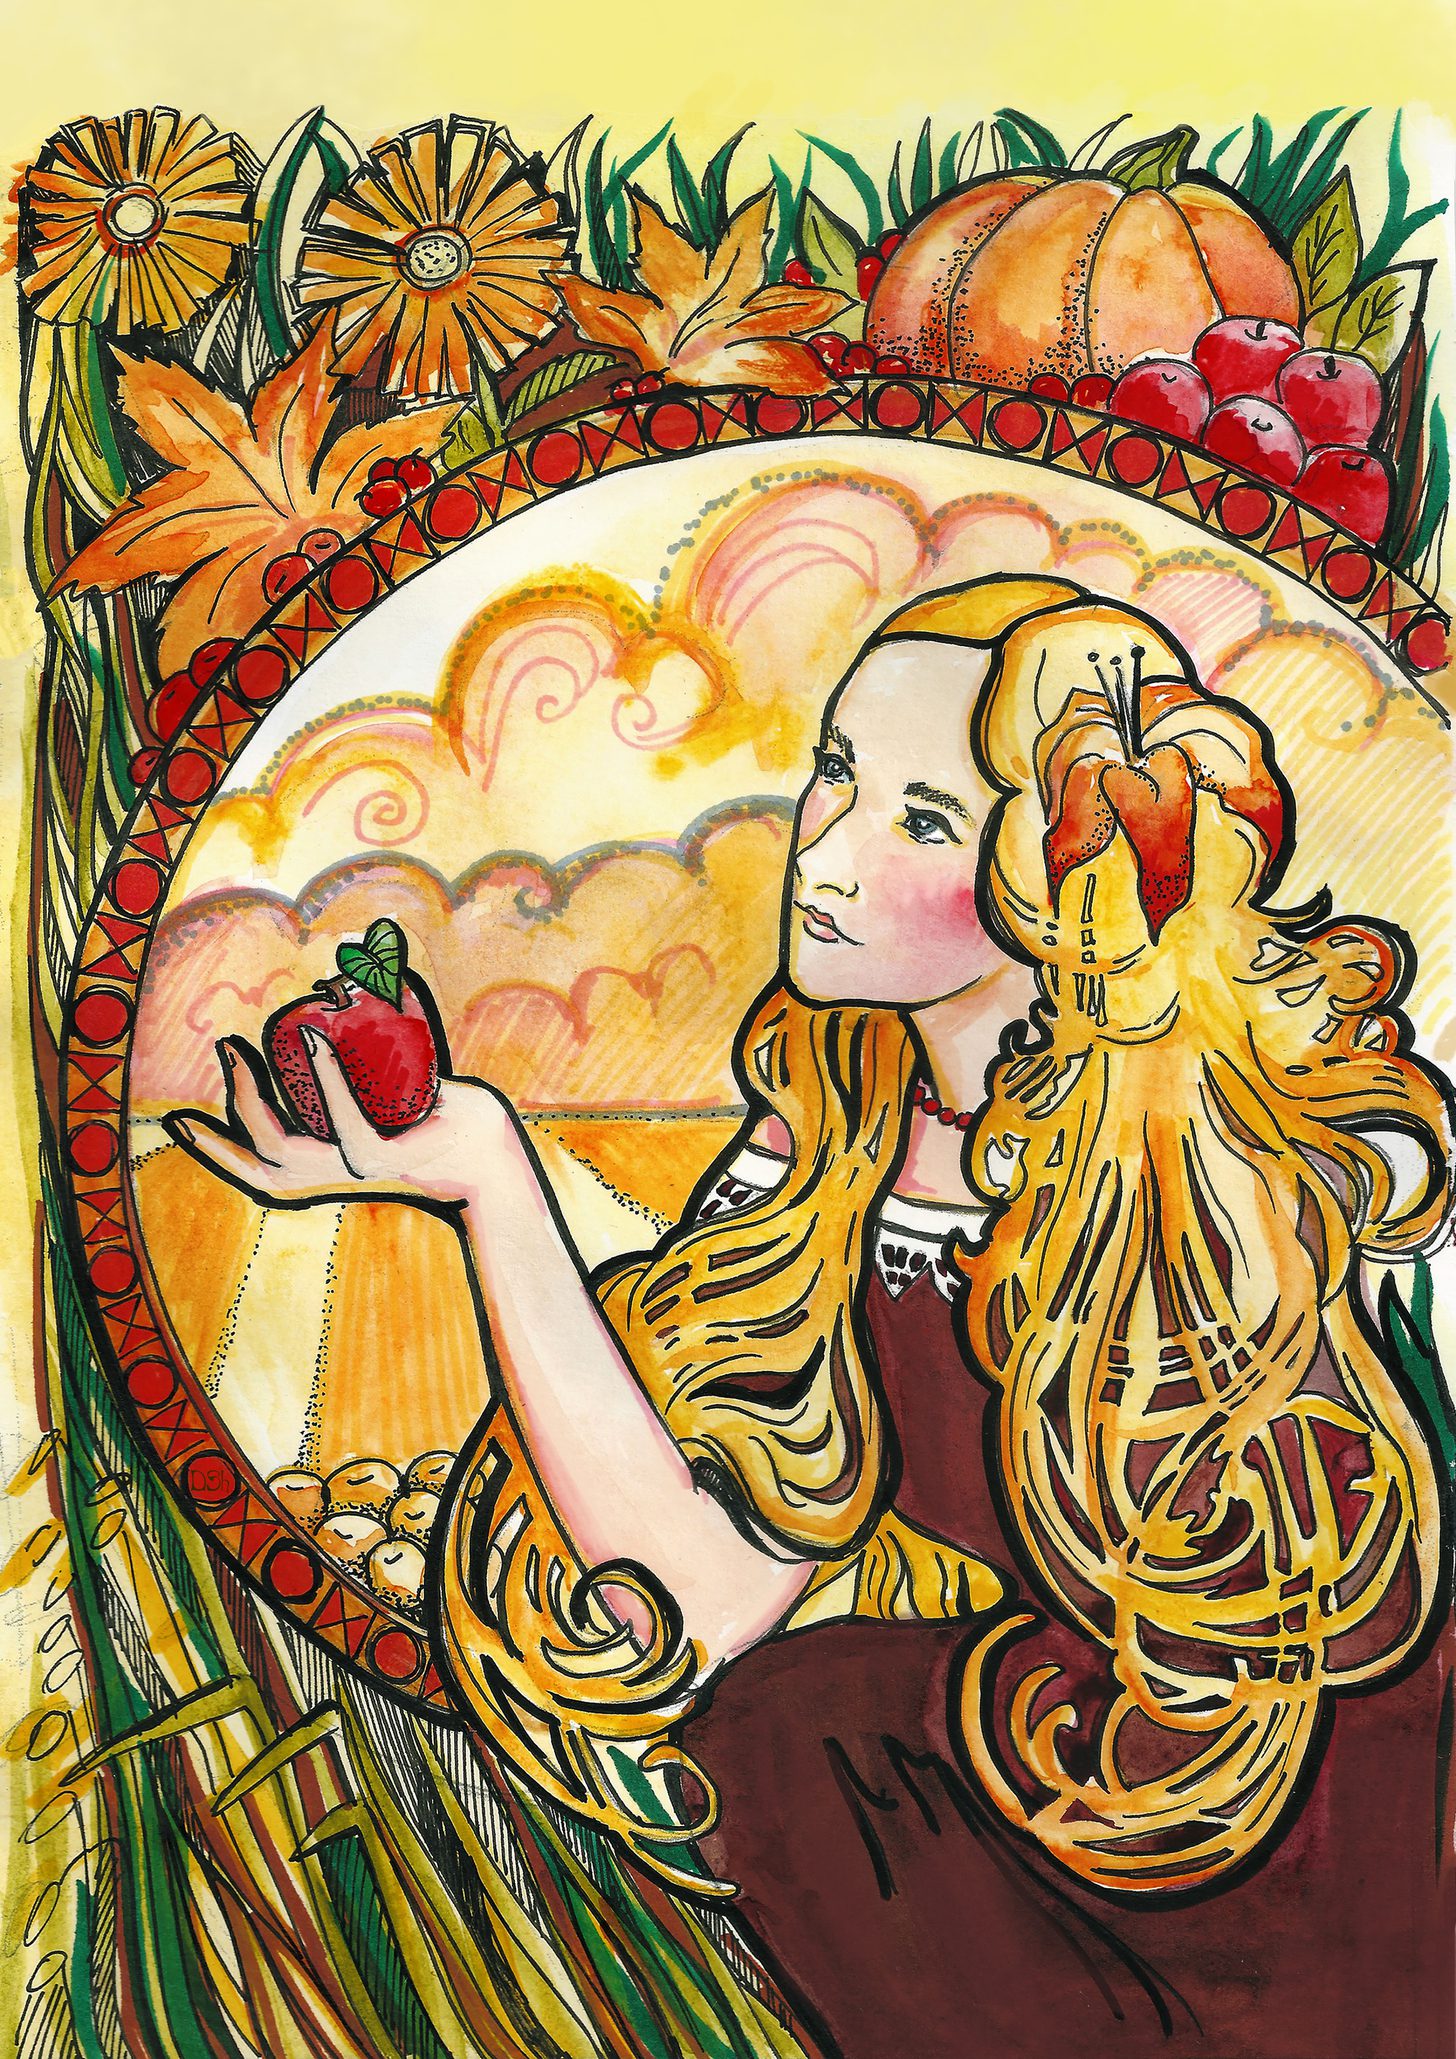 beautiful girl with blond hair sits with an apple in her hands, illustration of the Art Nouveau